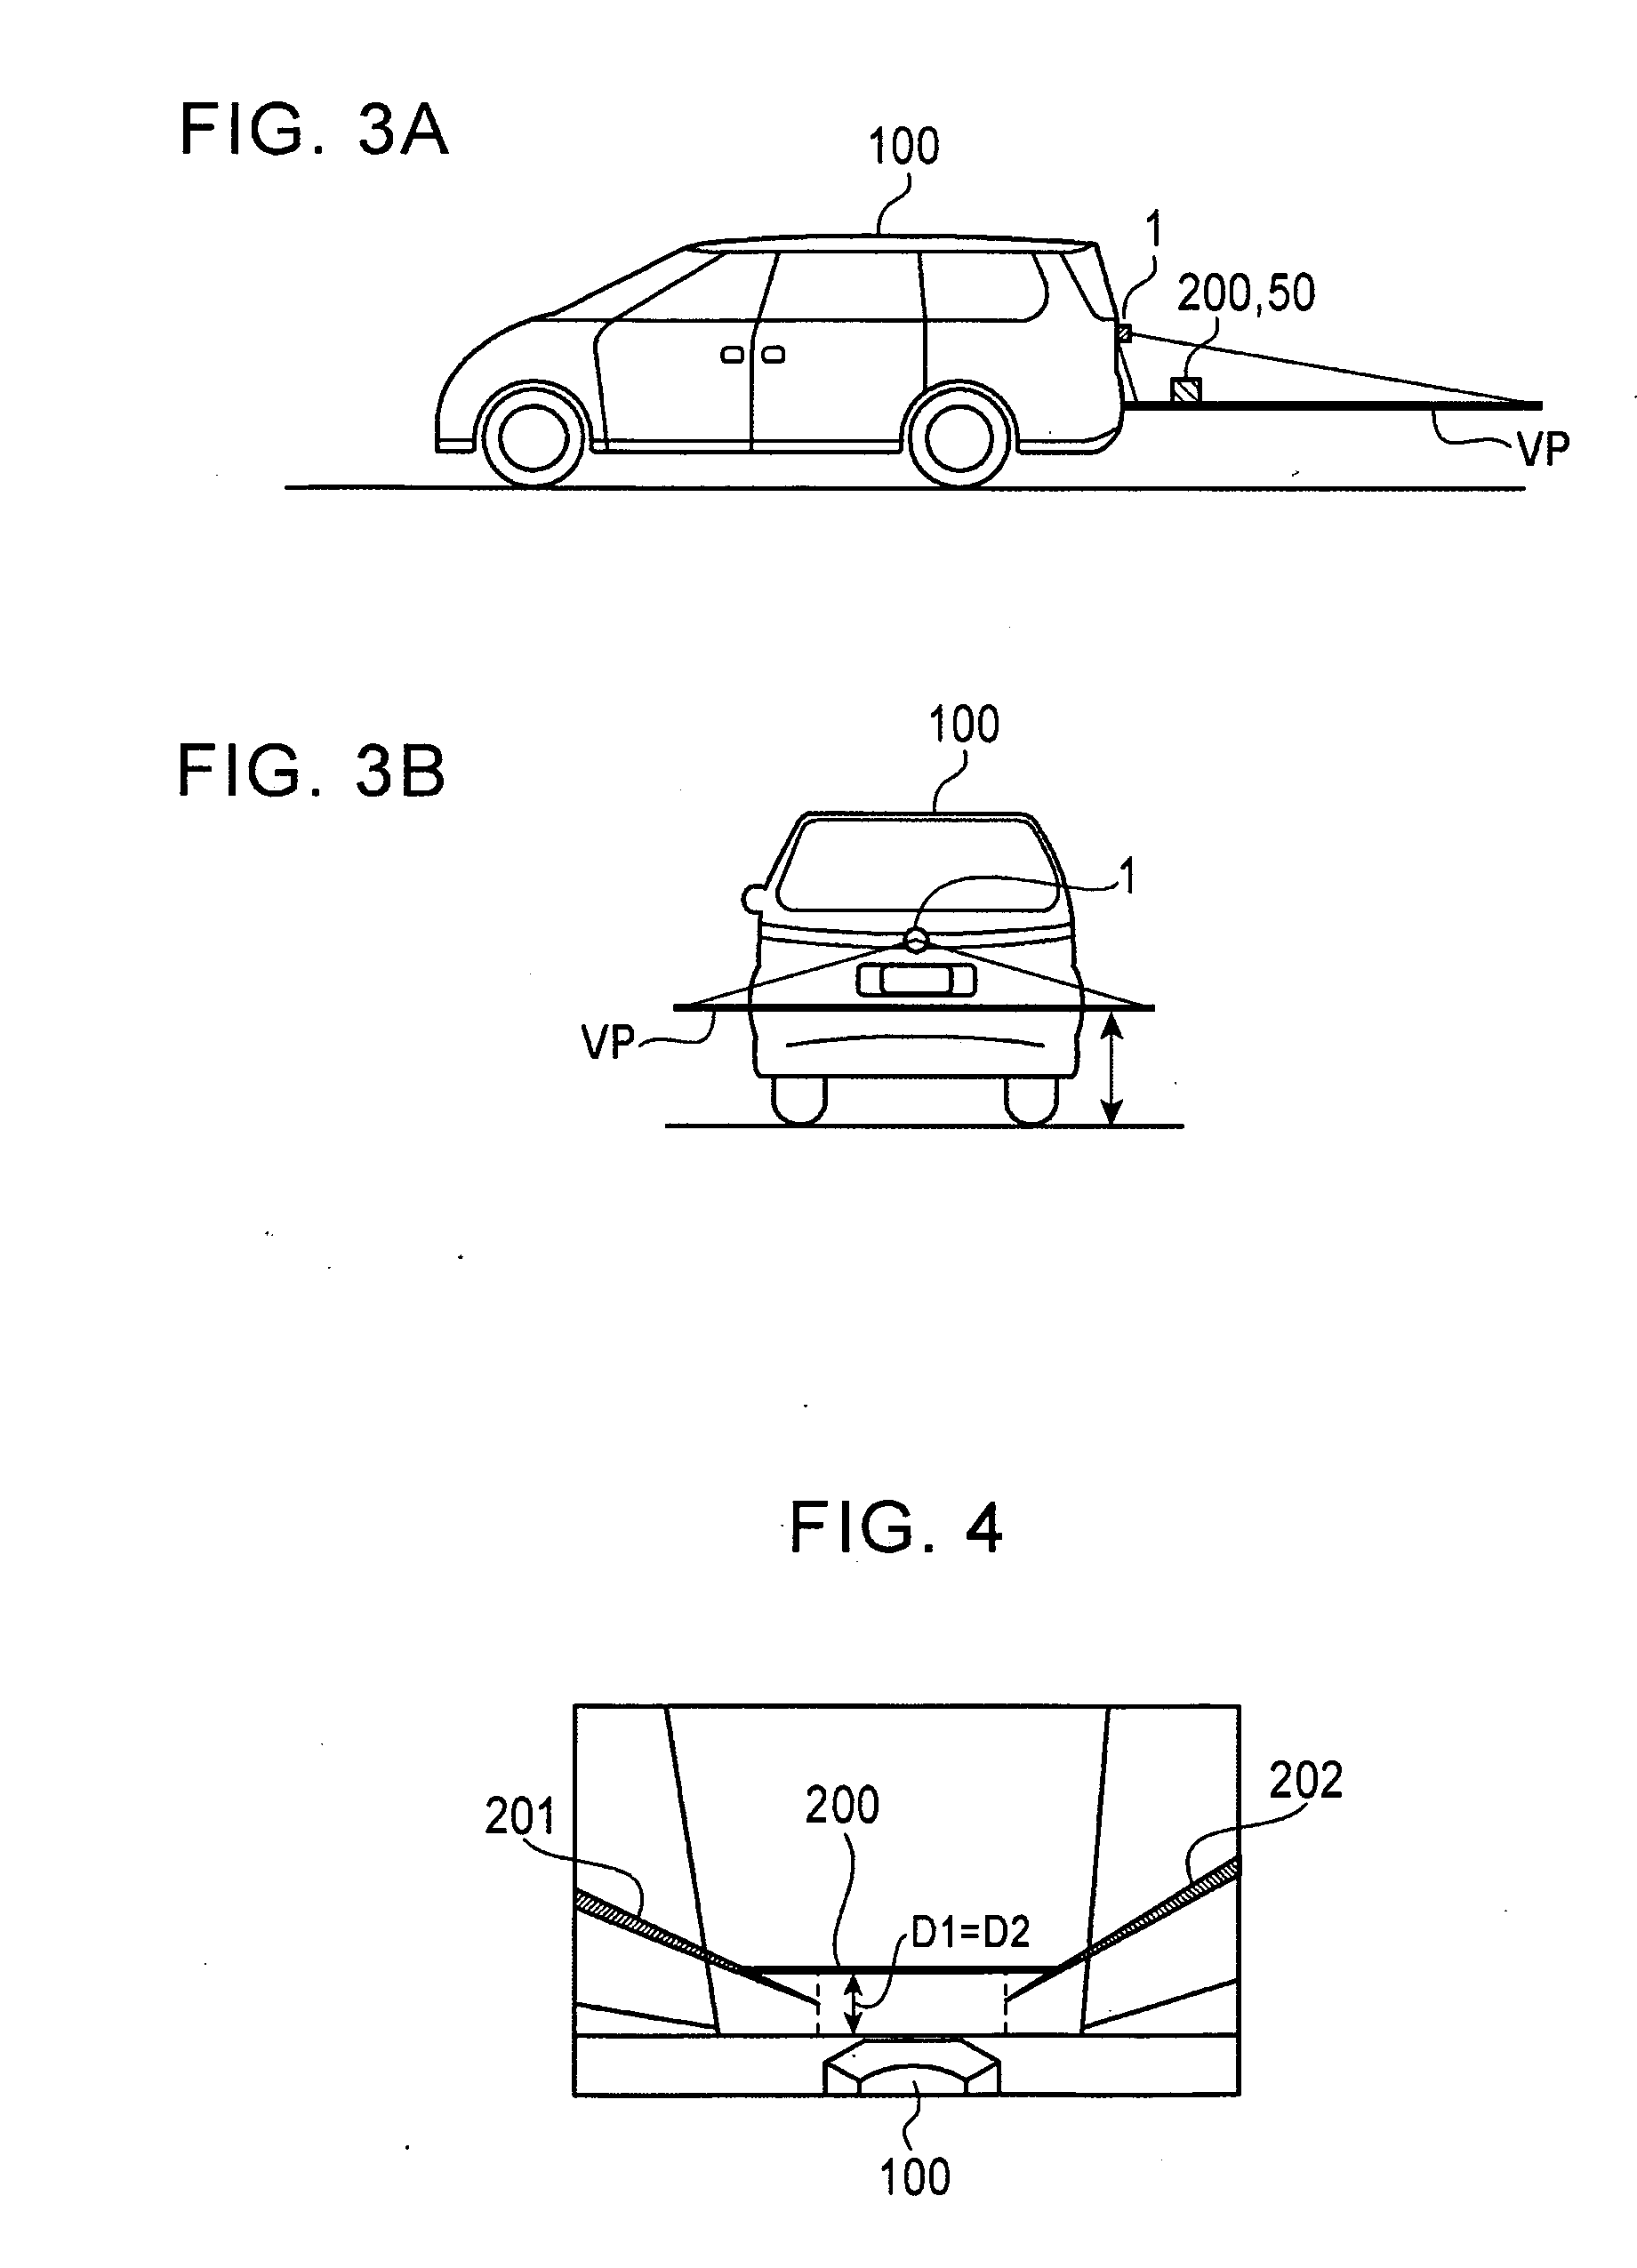 Method and apparatus for generating a bird's-eye view image